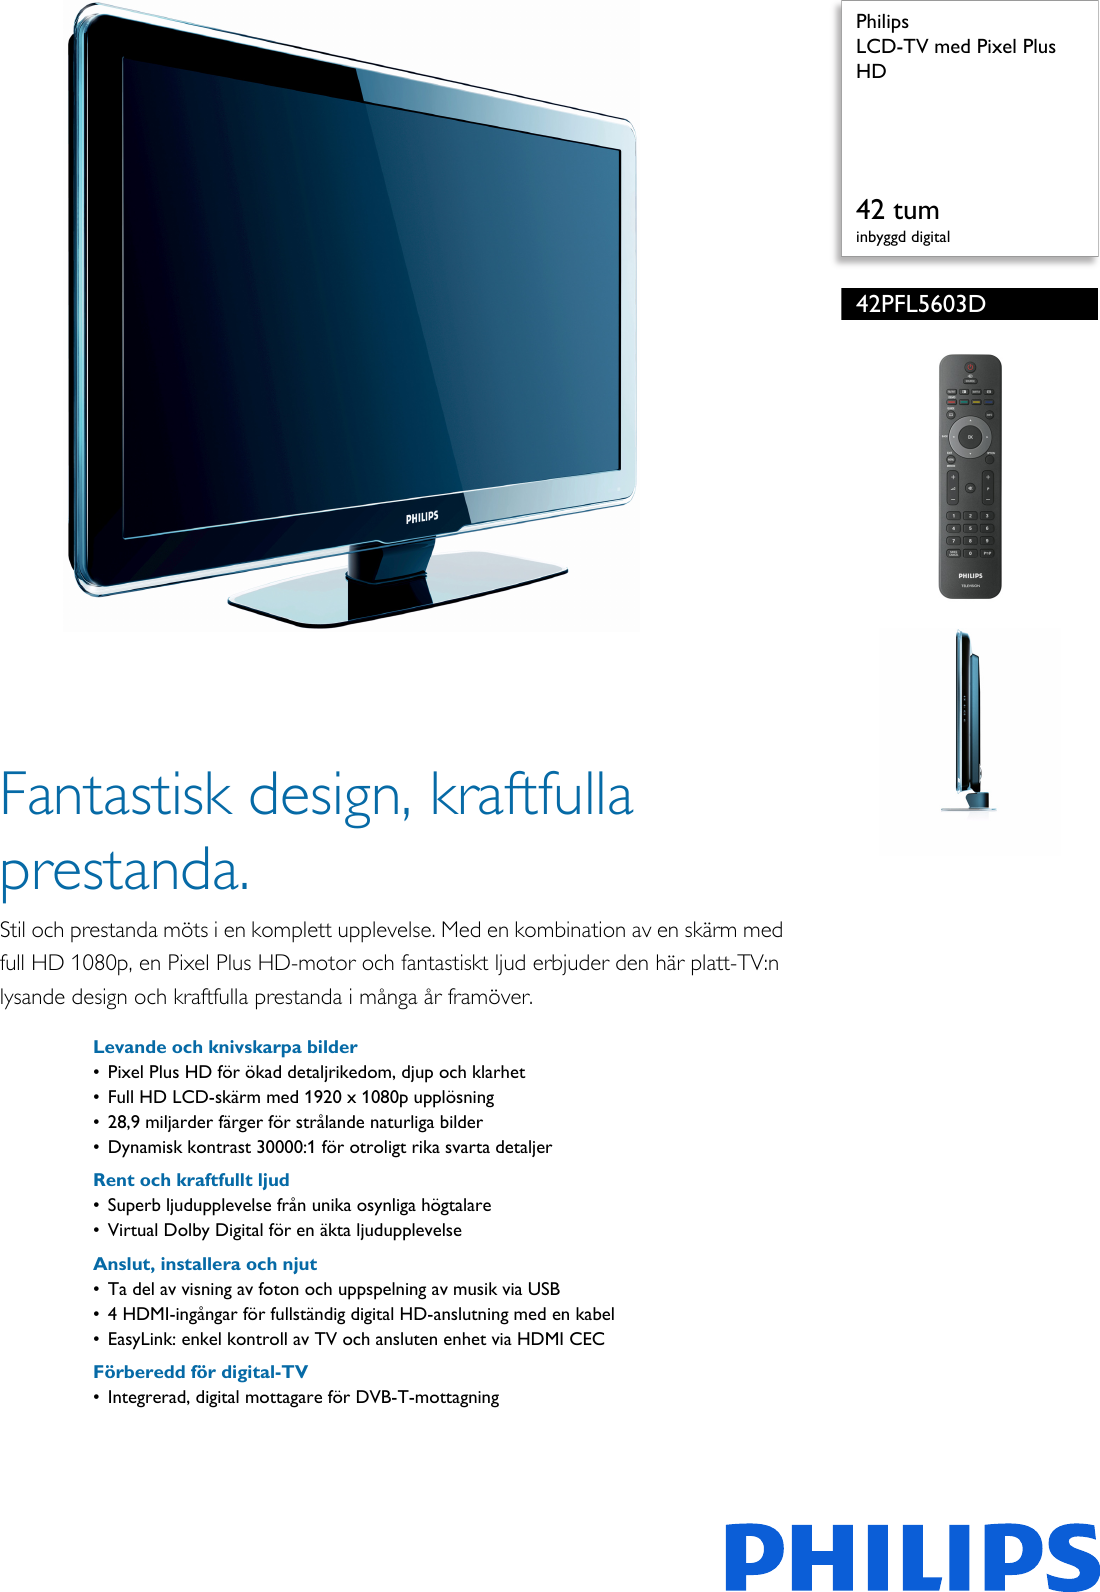 Page 1 of 3 - Philips 42PFL5603D/12 LCD-TV Med Pixel Plus HD User Manual Broschyr 42pfl5603d 12 Pss Swese